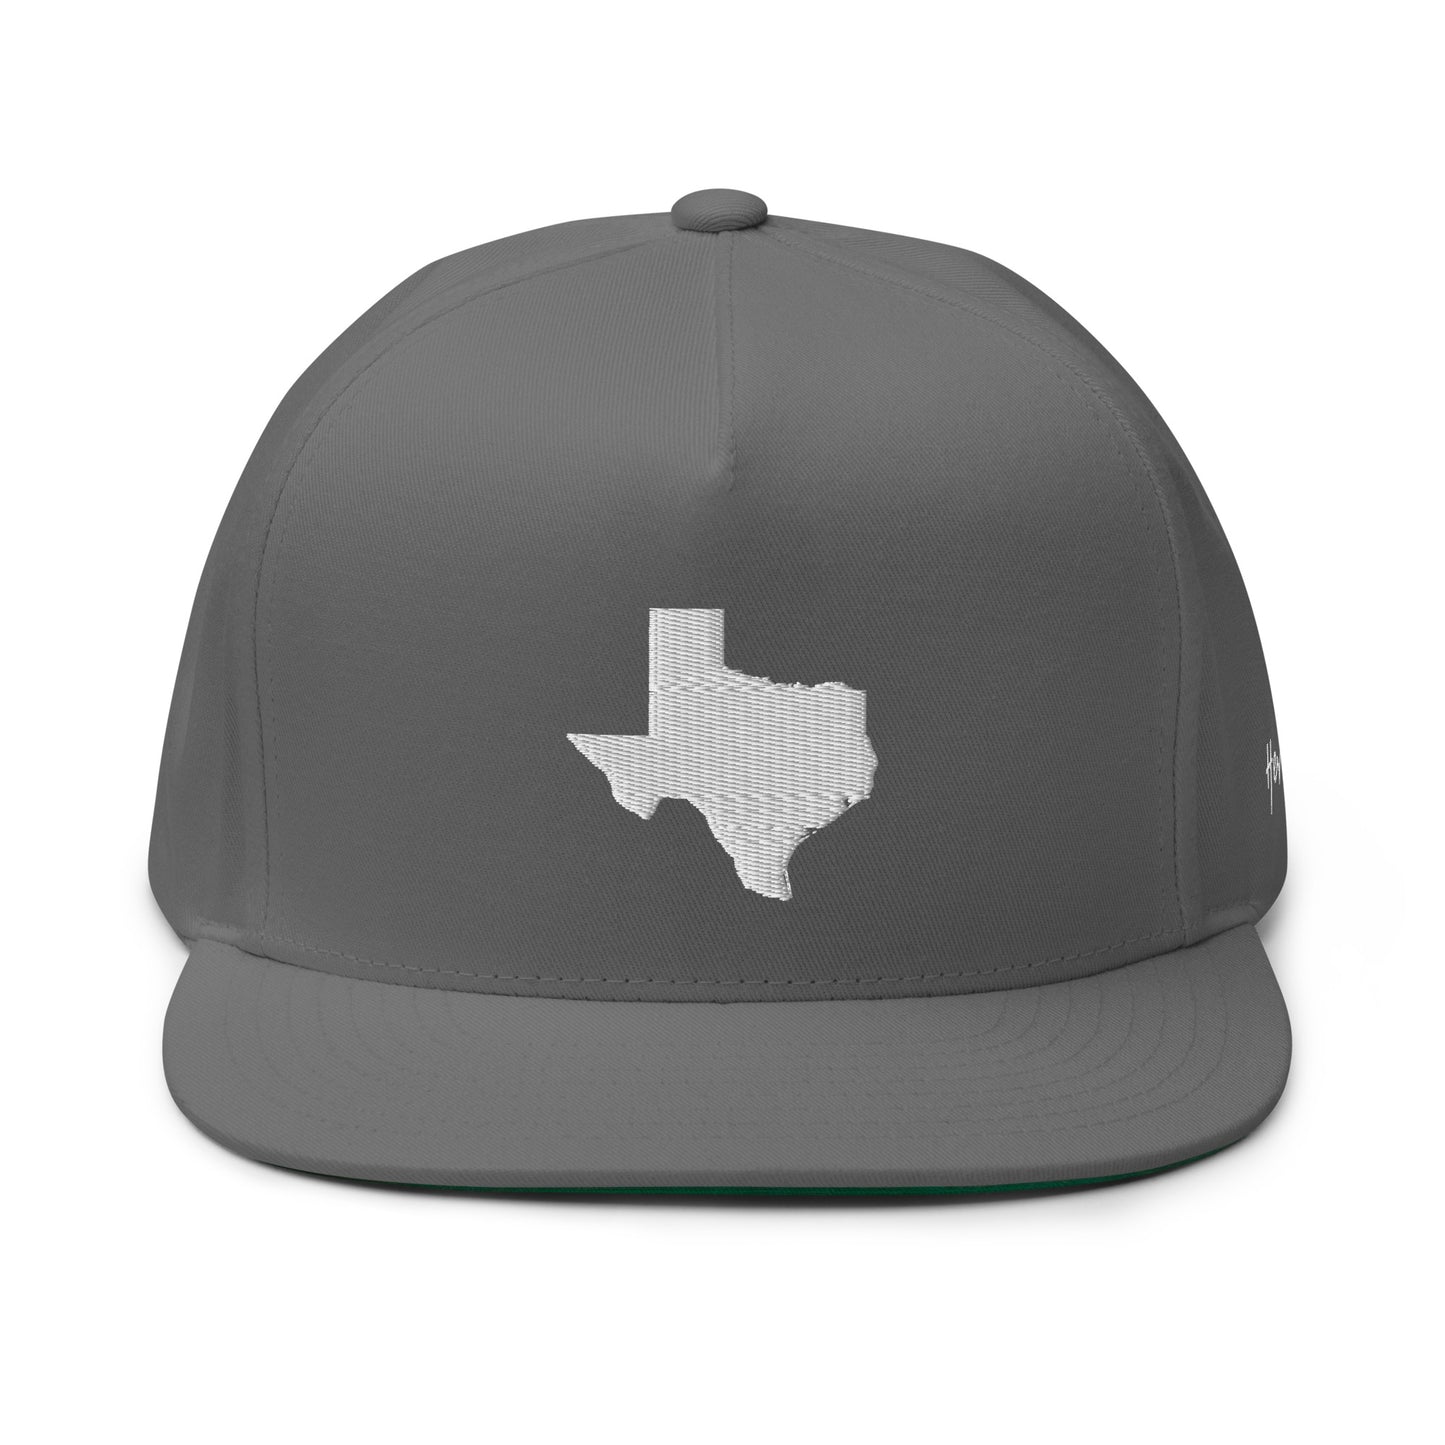 Texas State Silhouette 5 Panel A-Frame Snapback Hat